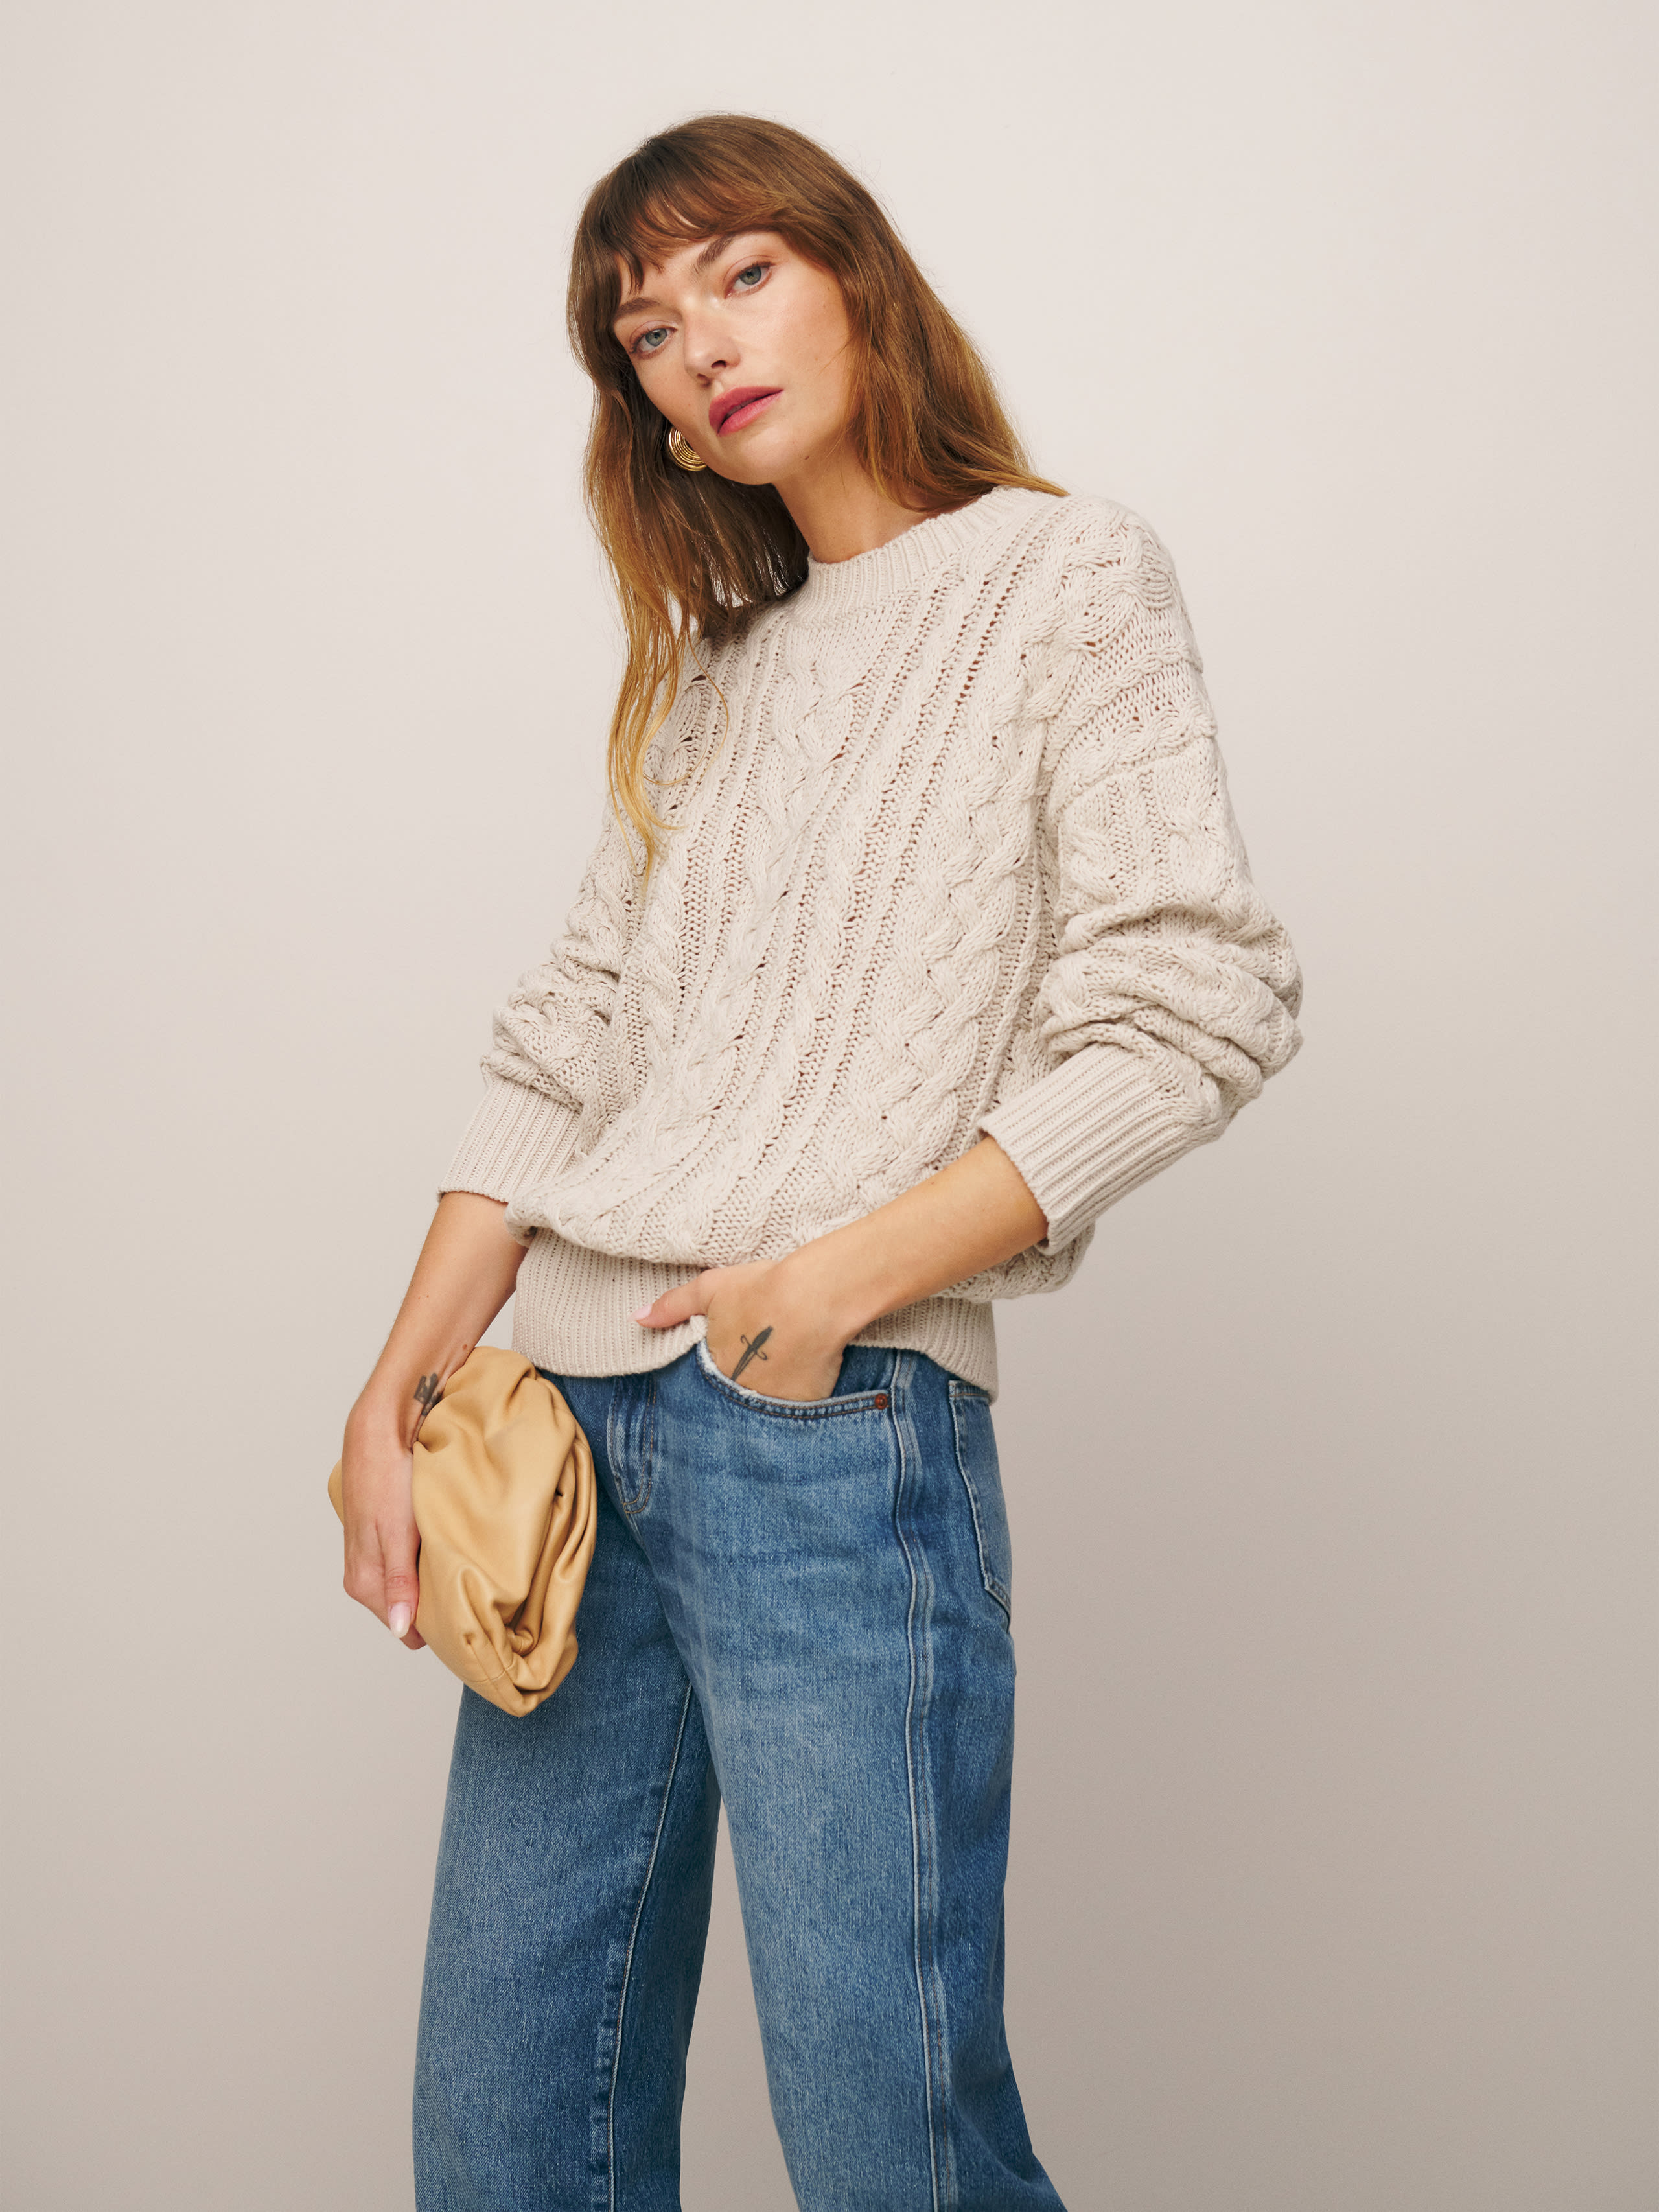 Reformation Sam Cotton Cashmere Oversized Crew Sweater In Gossamer Cable